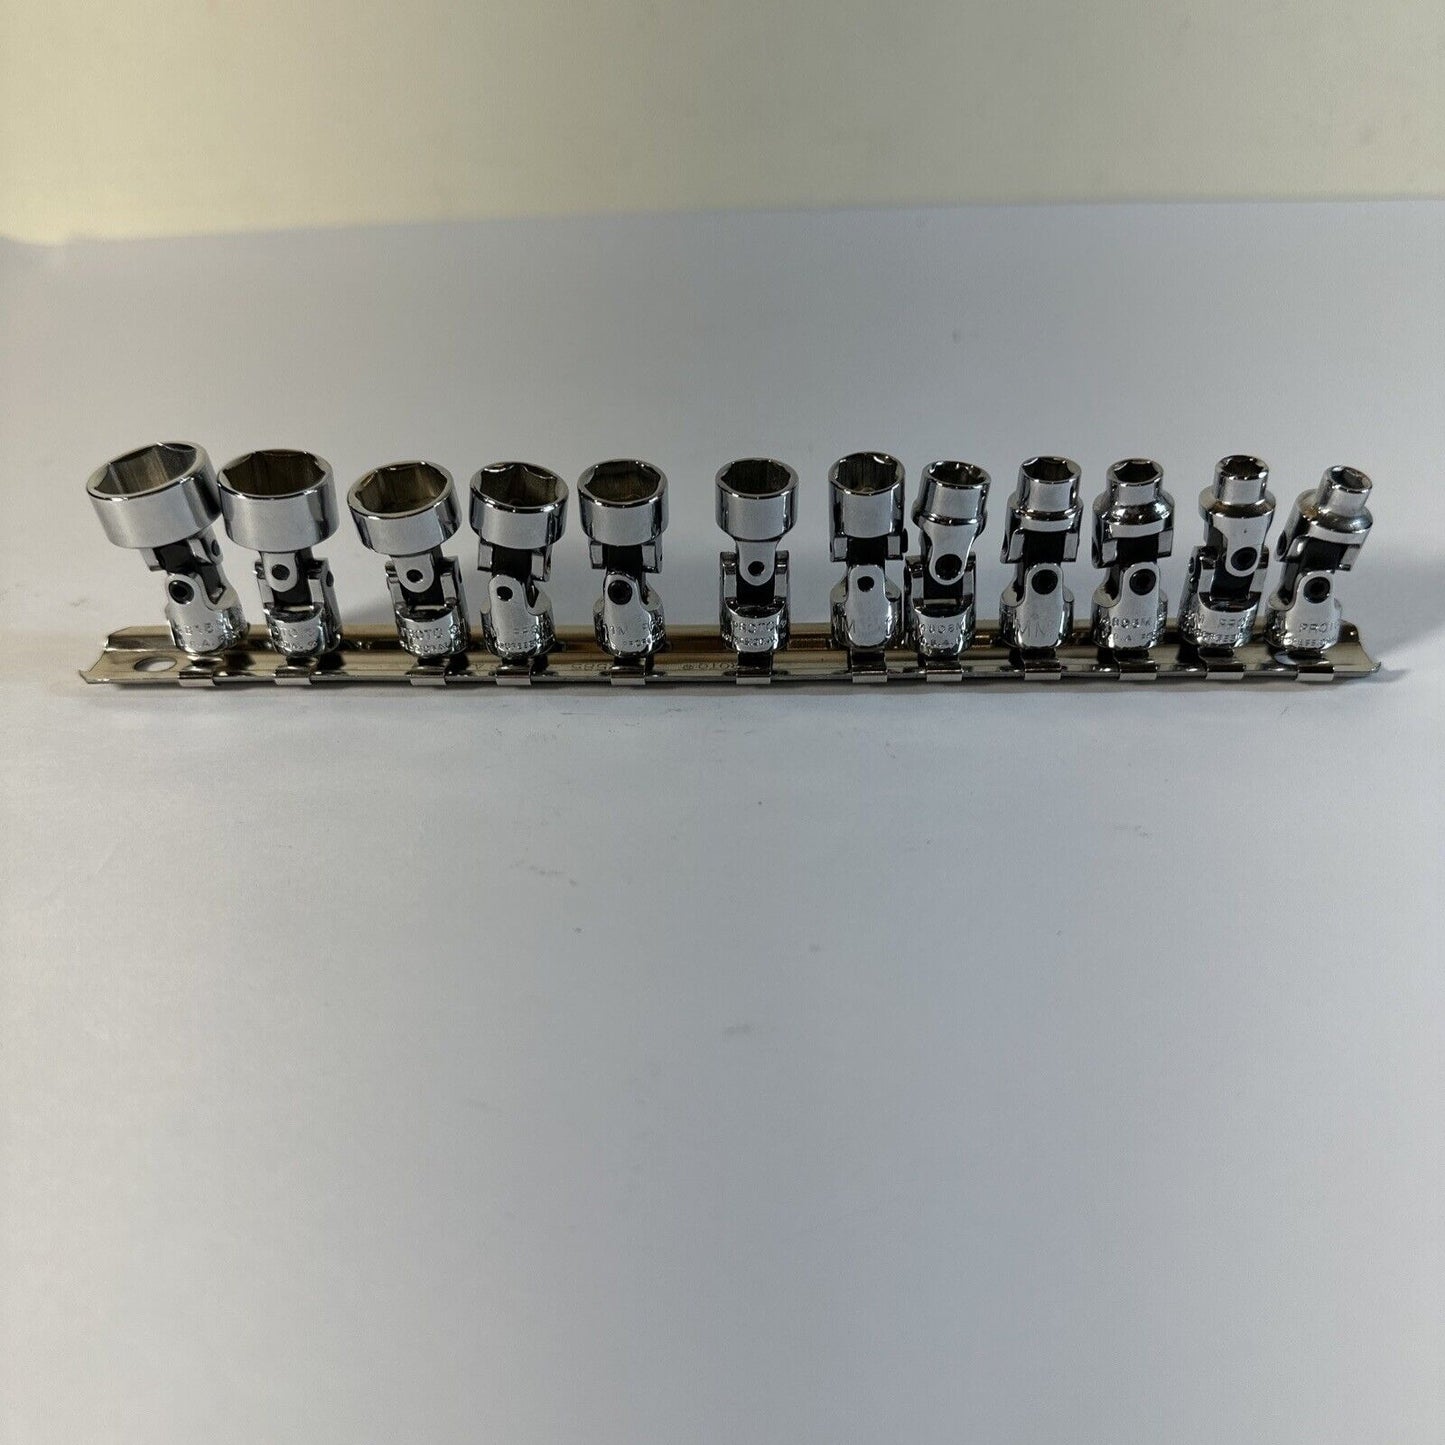 PROTO Socket Set: 1/4 in Drive Size, 12 Pieces, 5 mm to 15 mm Socket Size Range